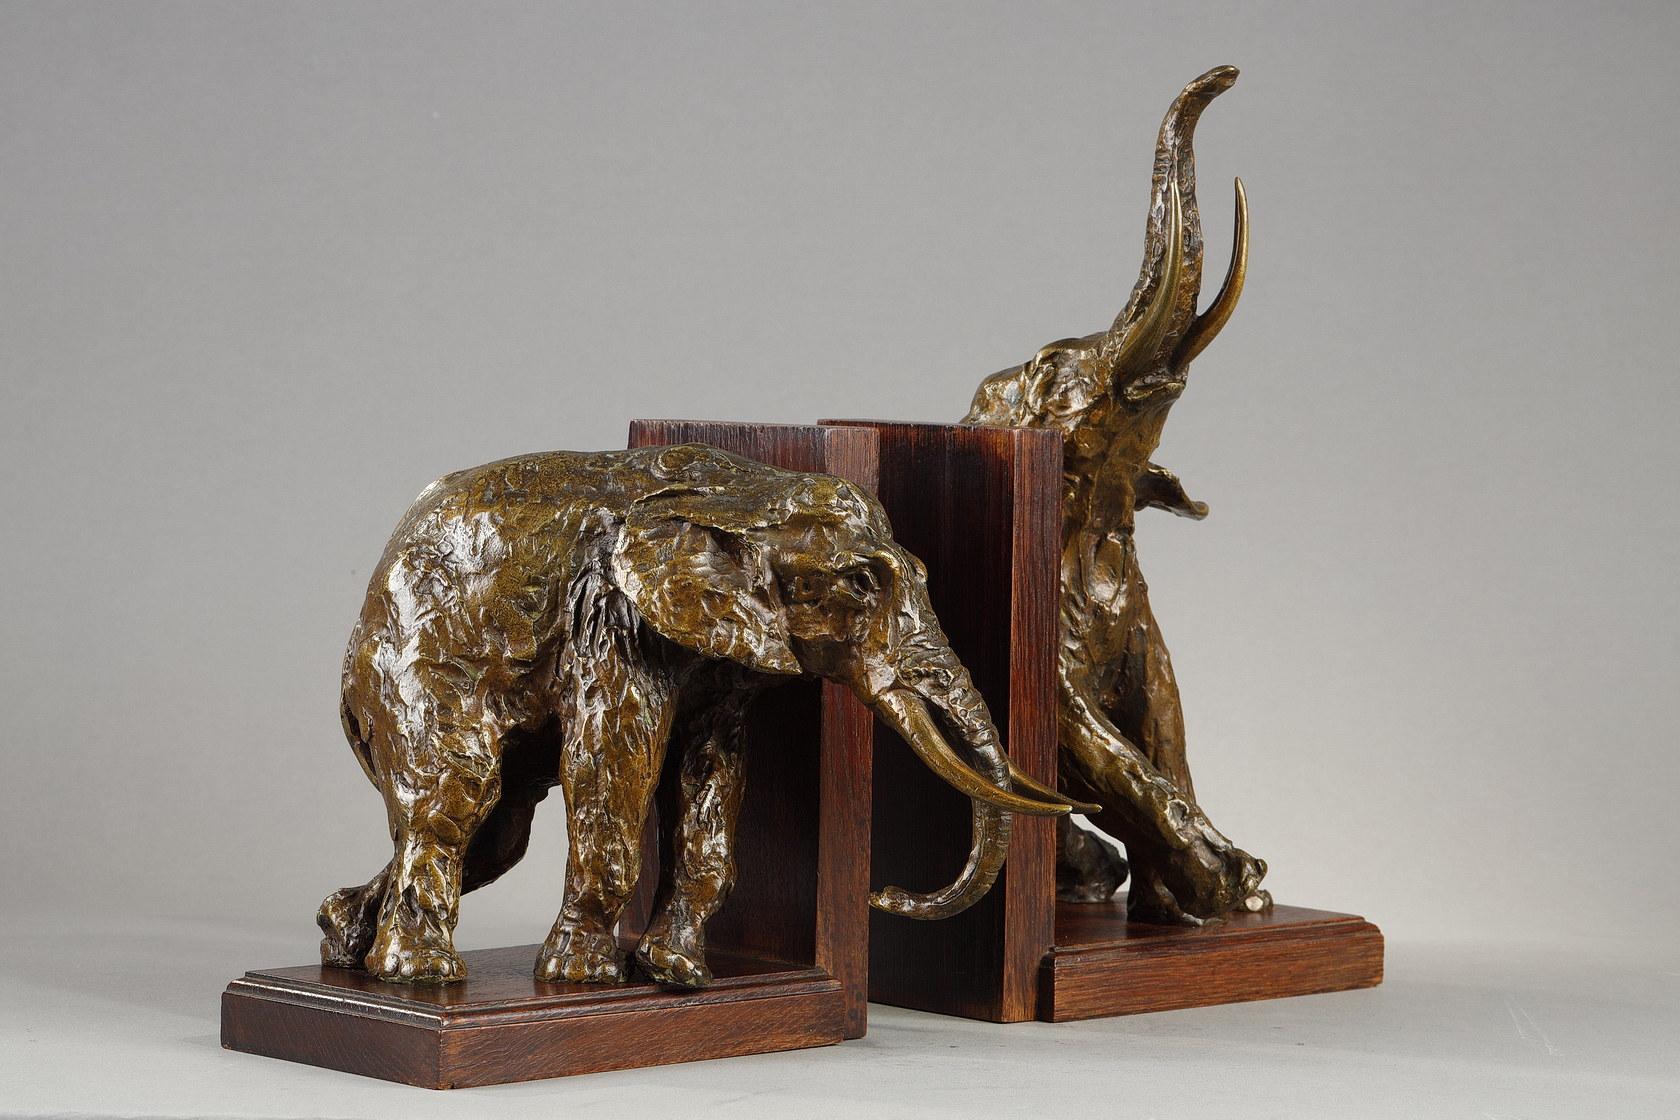 Pair of bookends with Elephants - Sculpture by Ary Bitter